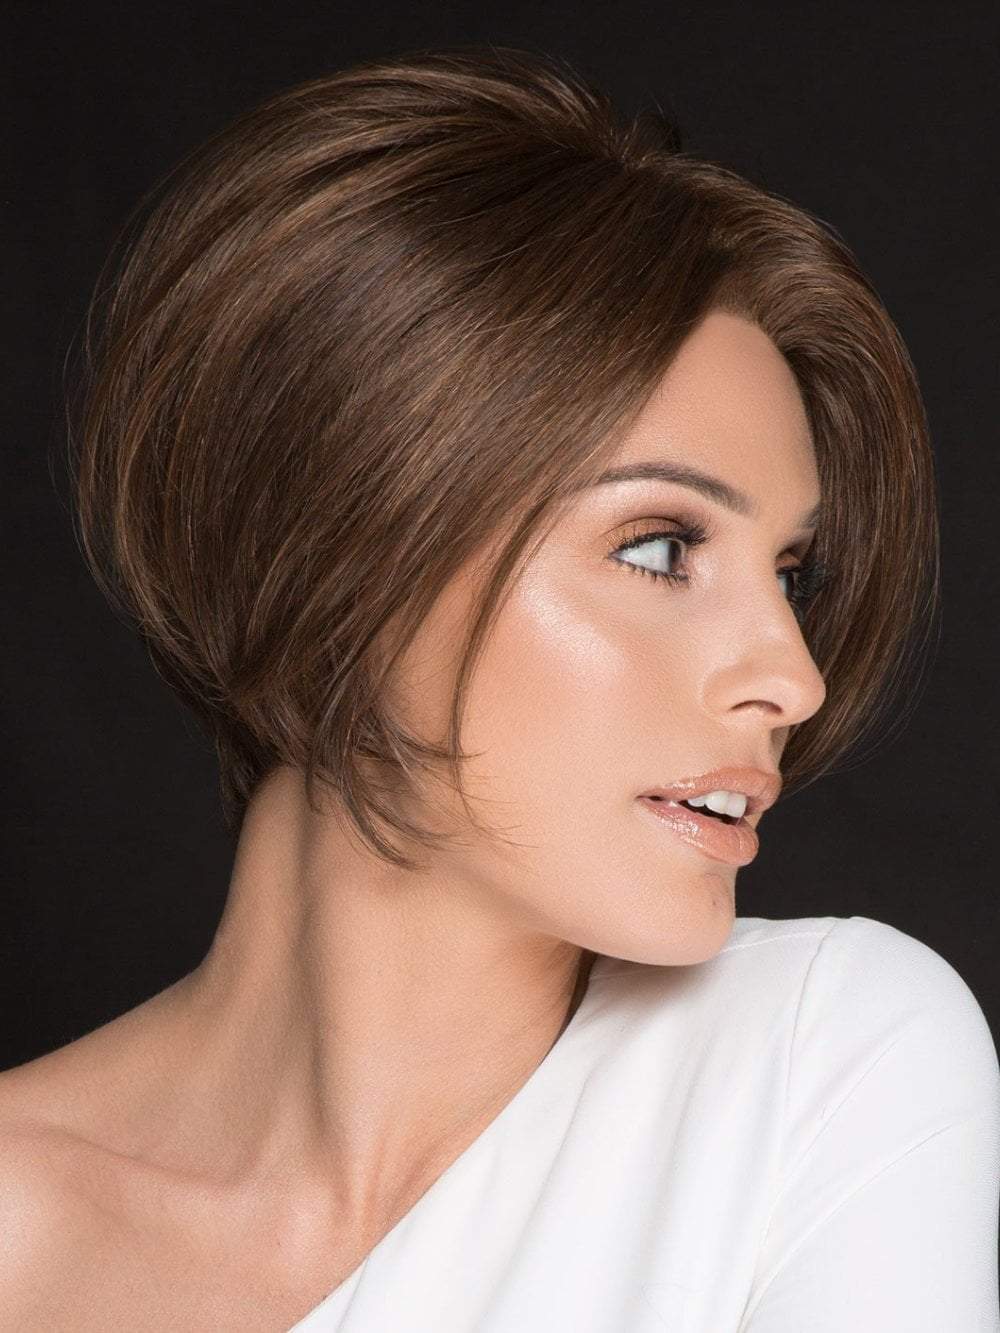 Rich by Ellen Wille is a lightweight asymmetrical style with a long fringe that falls perfectly along the face